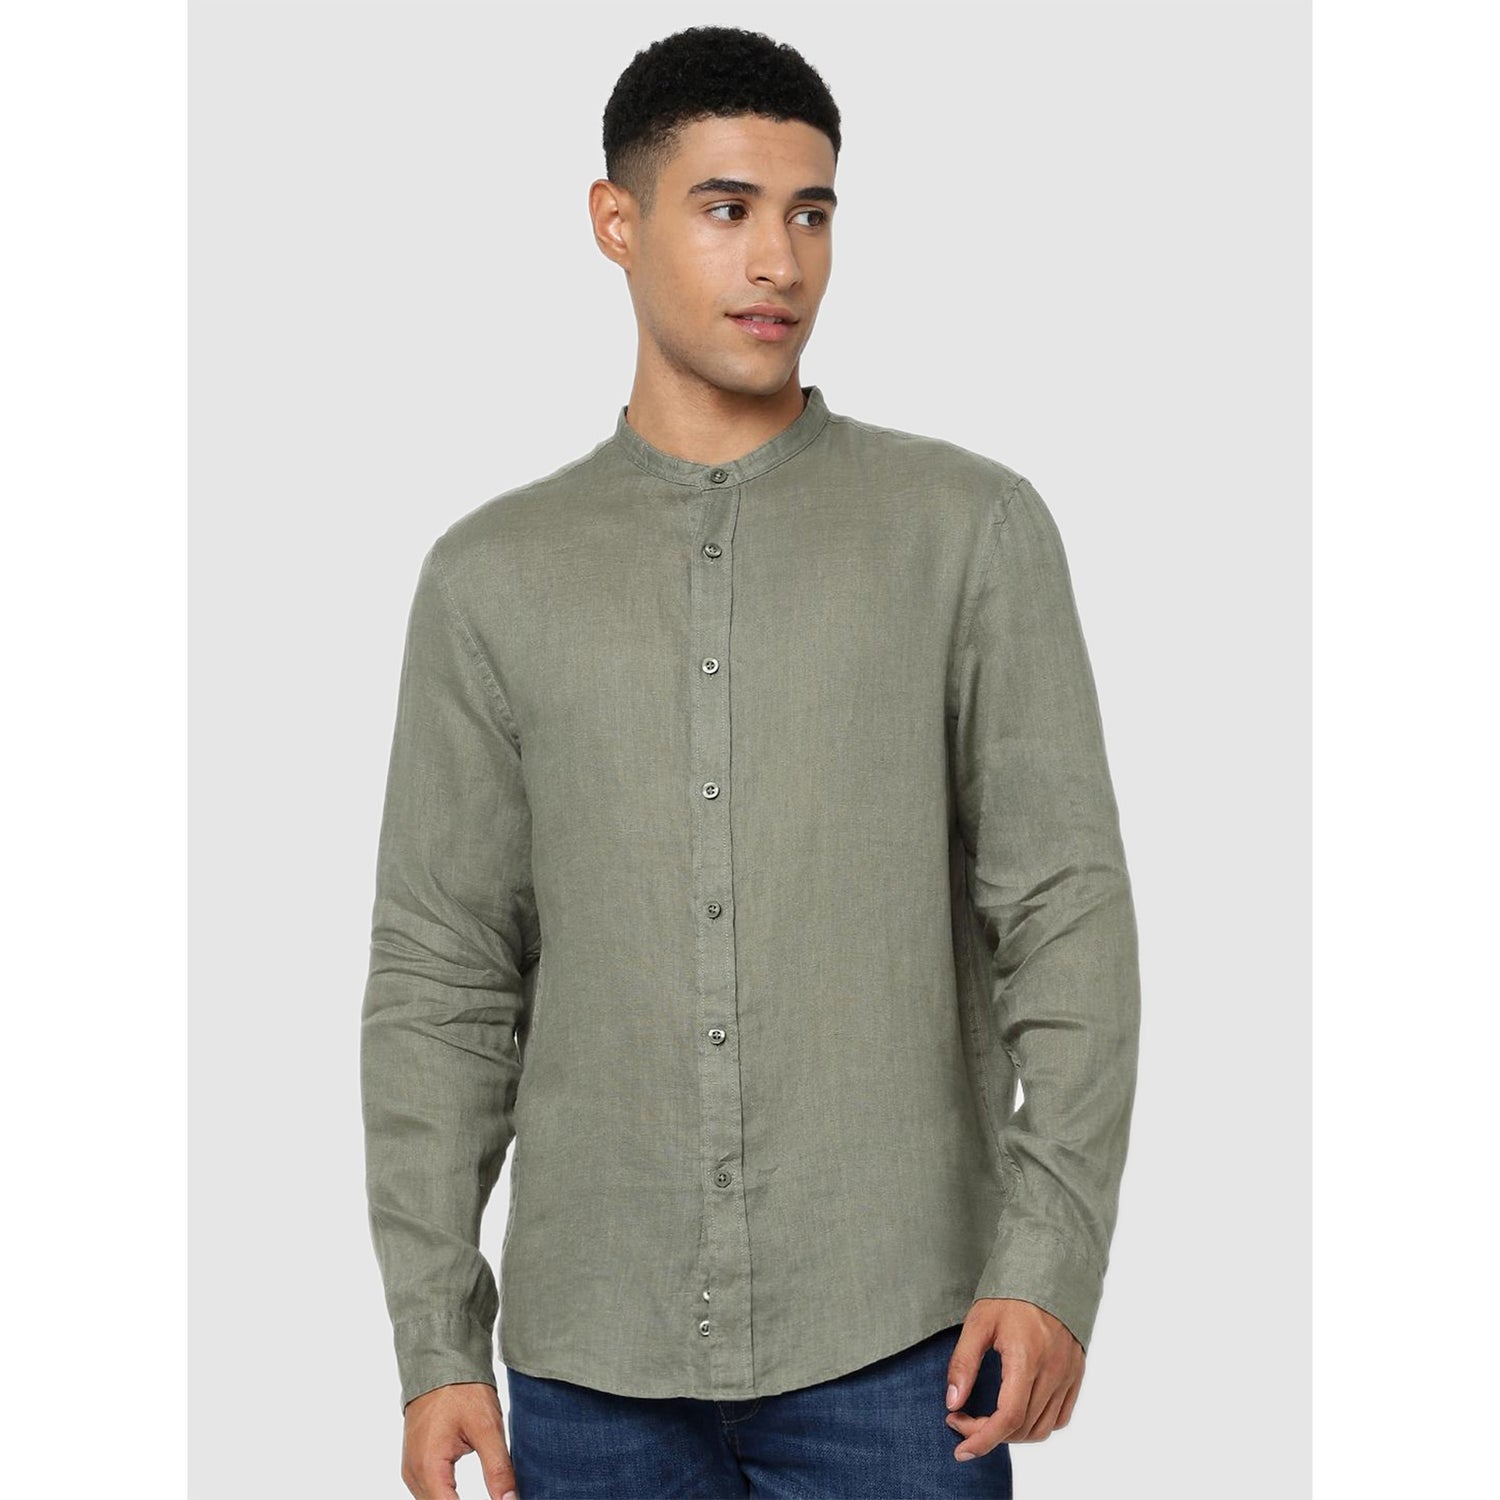 Olive Green Solid Regular Fit Classic Casual Shirt (BAMAOFLAX)